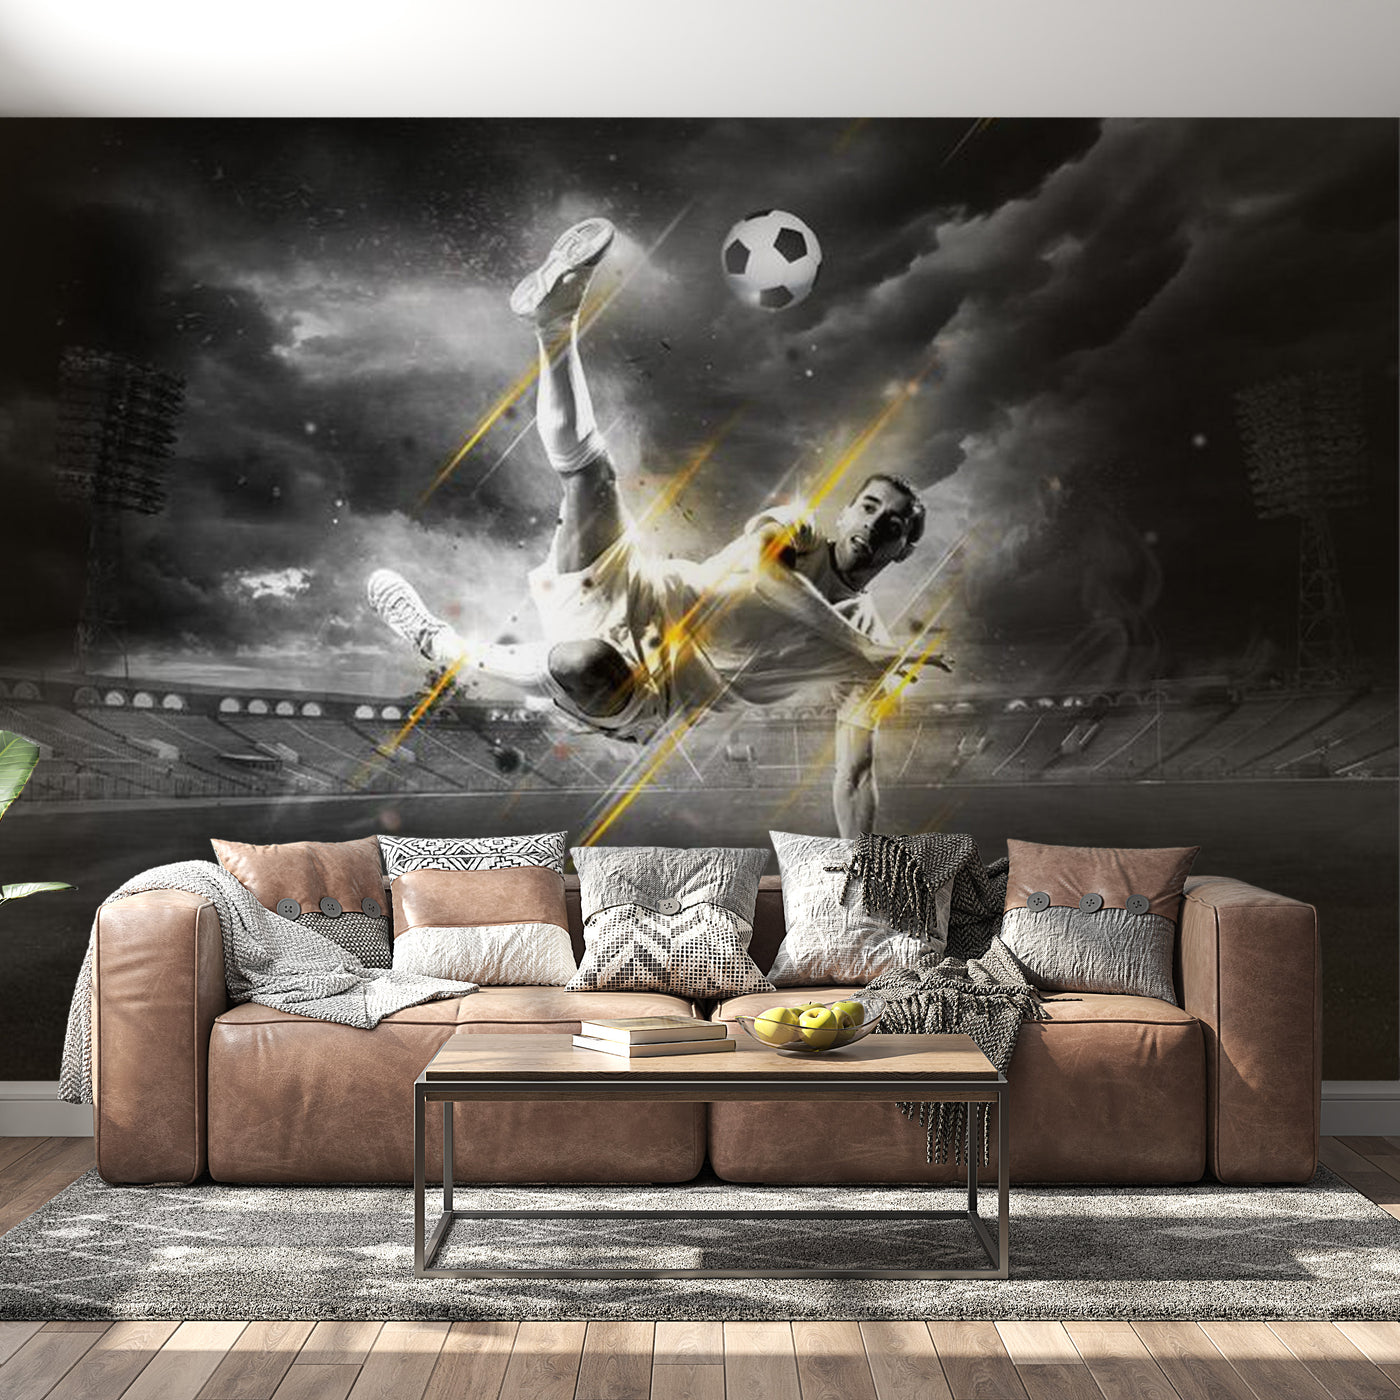 Peel & Stick Football Wall Mural - Soccer Legend - Removable Wall Decals